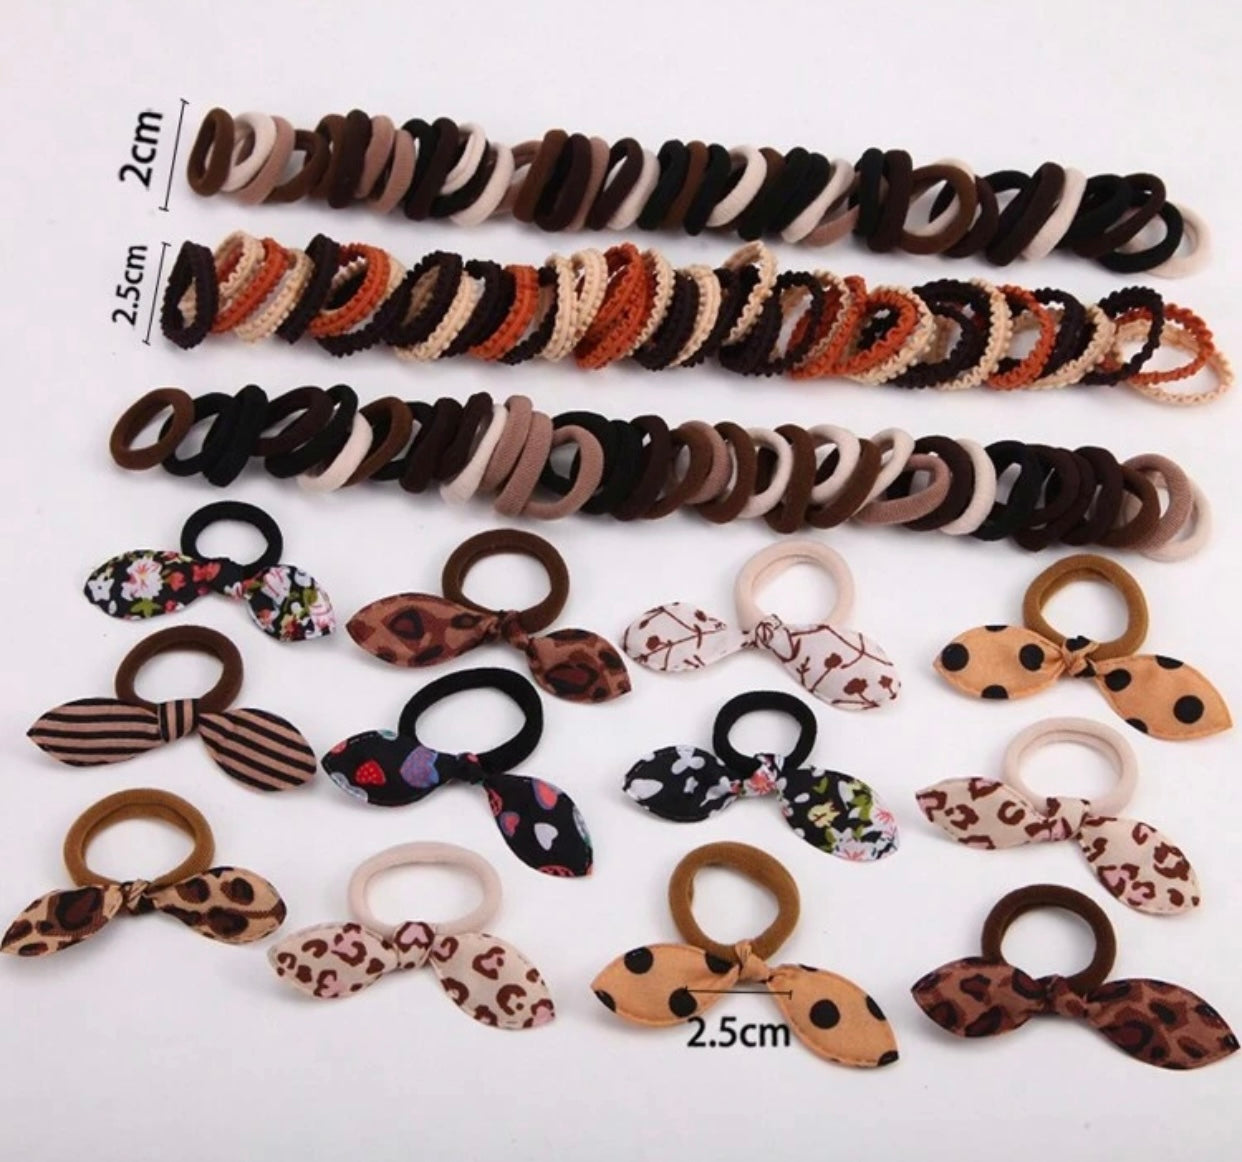 160 Small Brown Bobbles, Differeny Sizes, Hair ties